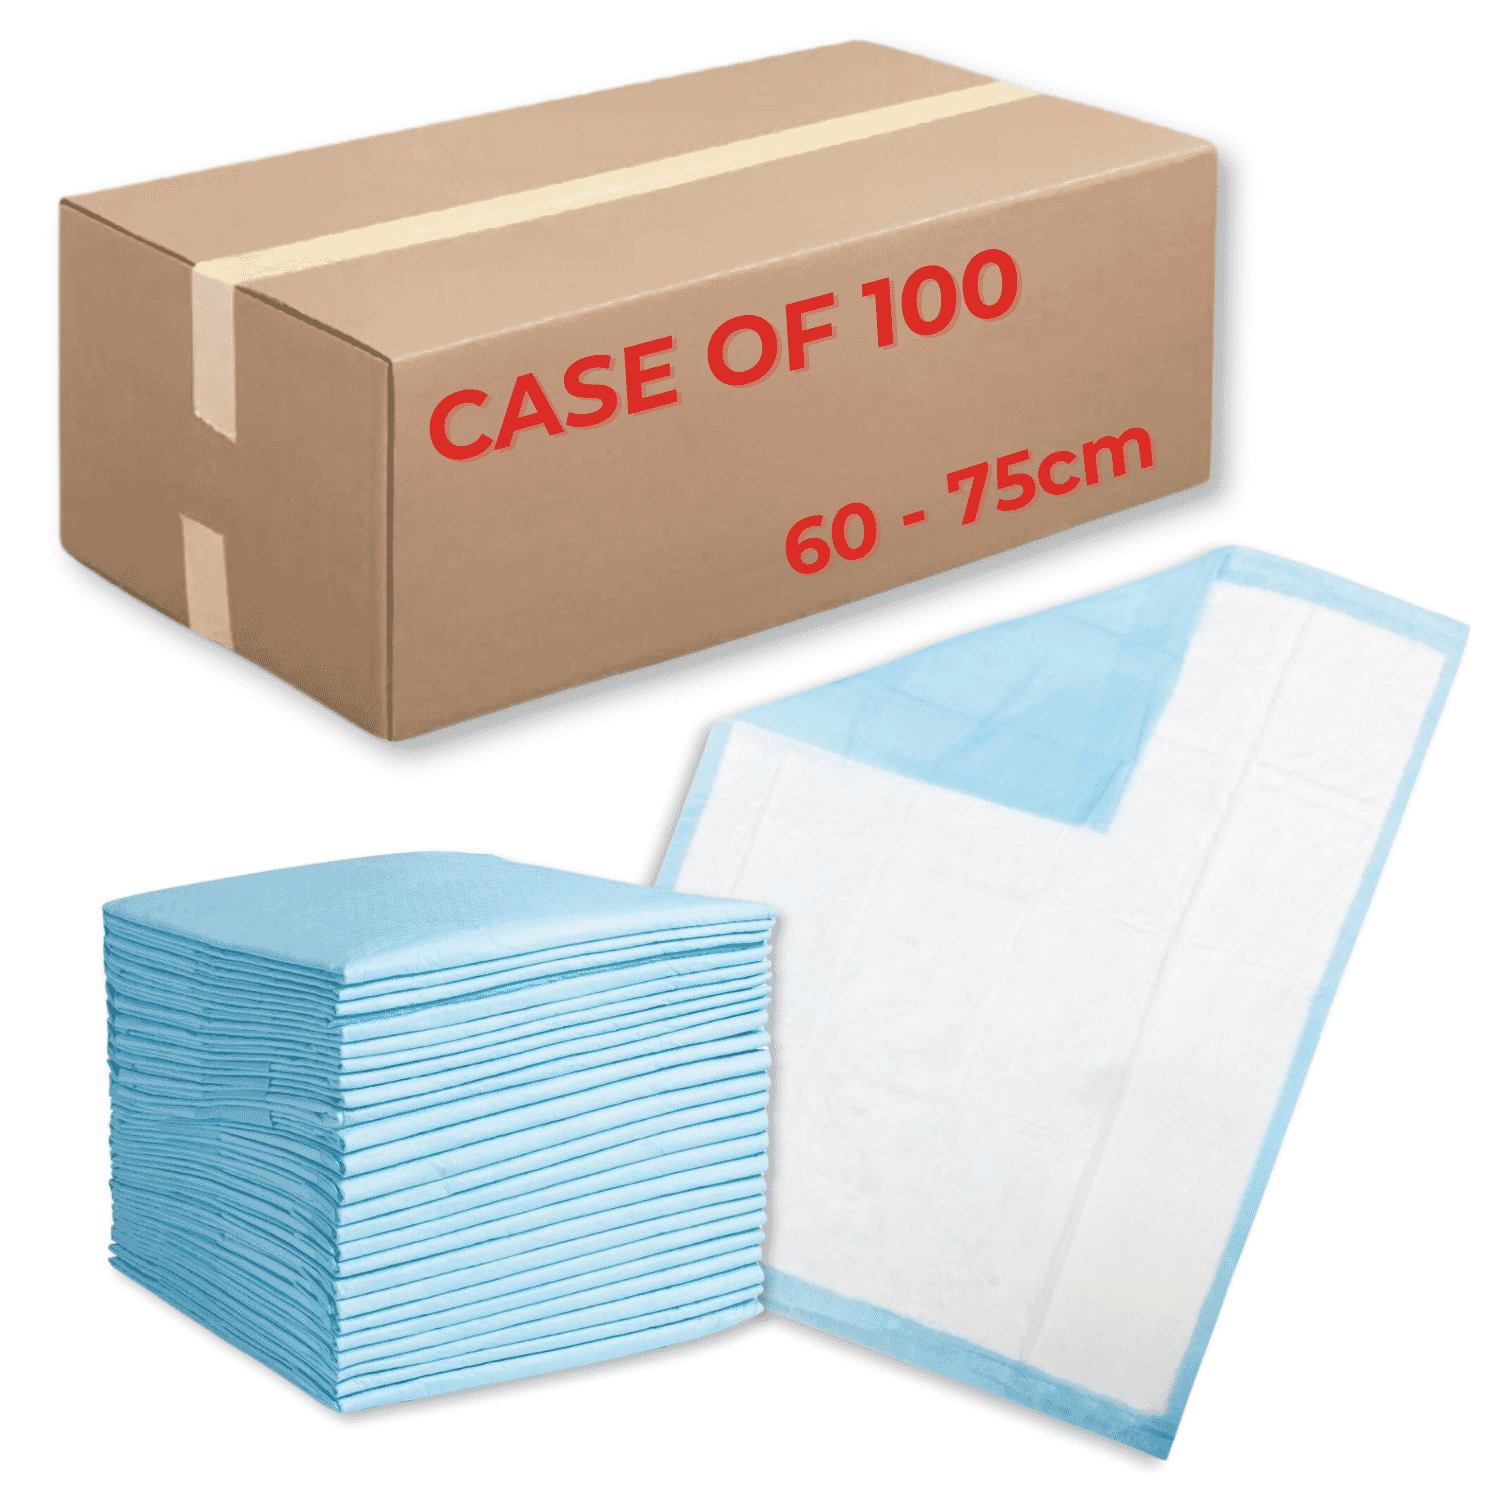 View Disposable Bed Pads 60cm x 75cm Case of 100 information